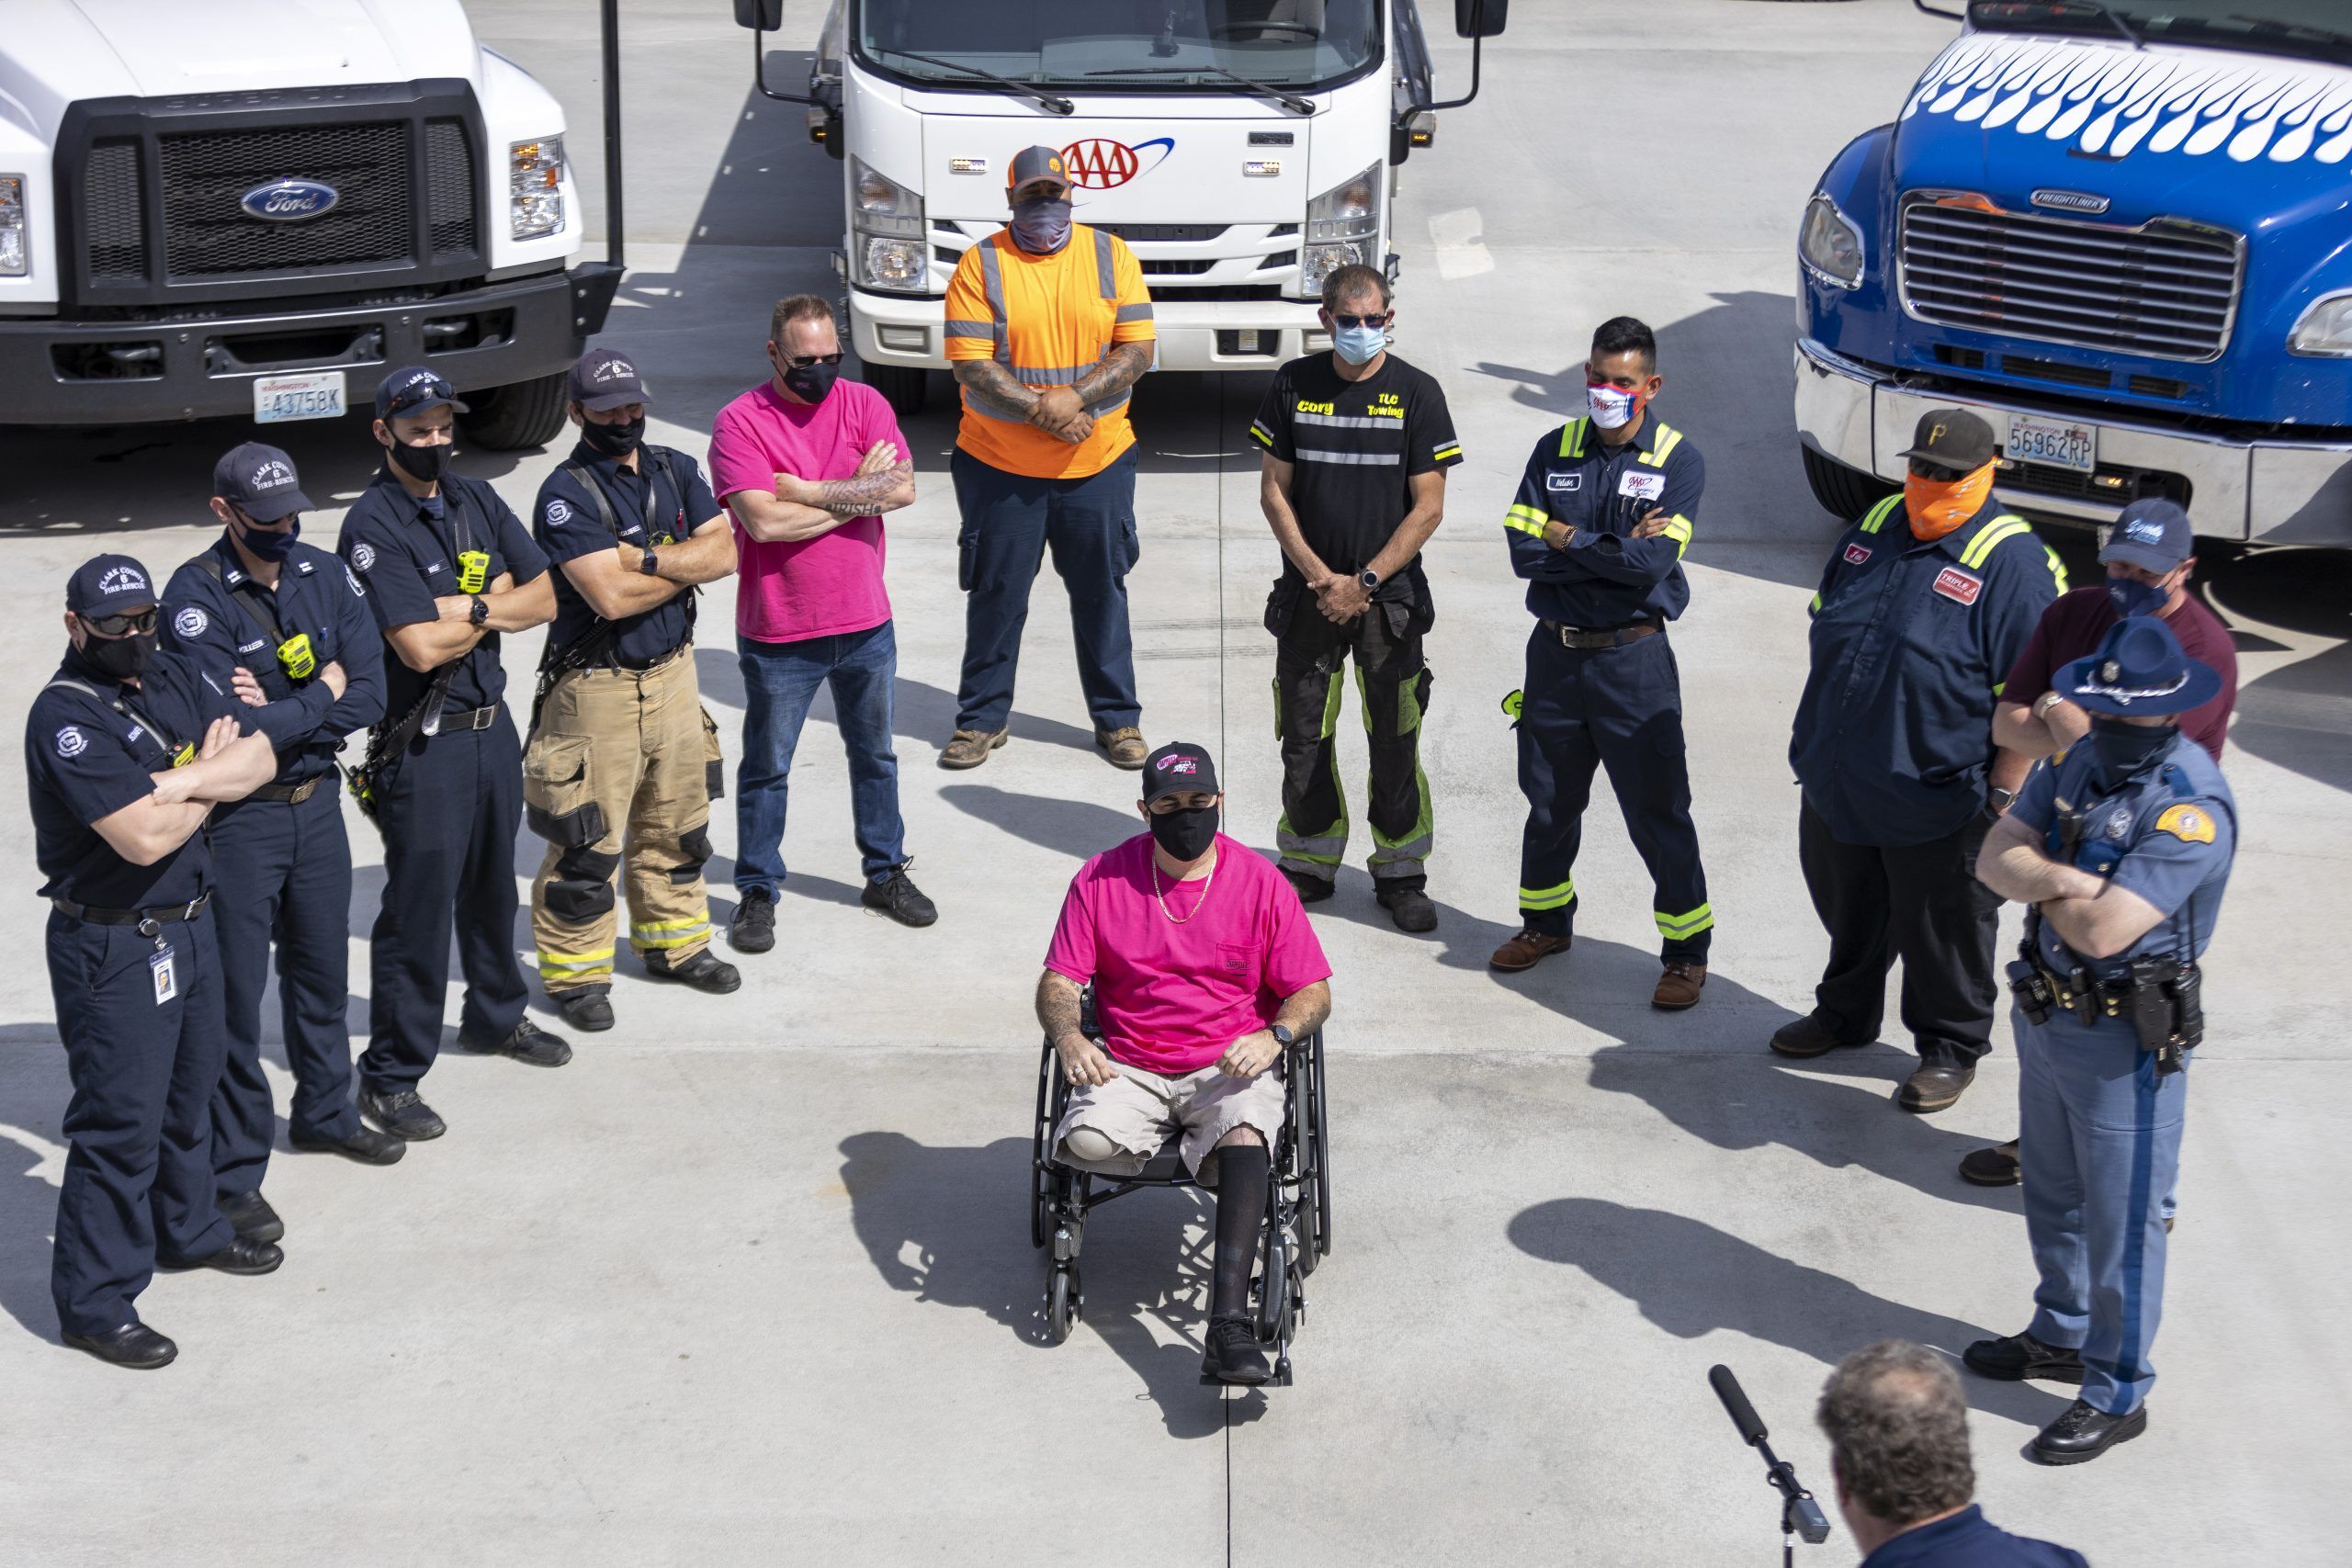  Chappelle’s Towing driver David Rios (center) lost his leg in an accident in January. He joined the group of first responders to create a PSA telling folks to “Slow Down, and Move Over.” Photo by Jacob Granneman